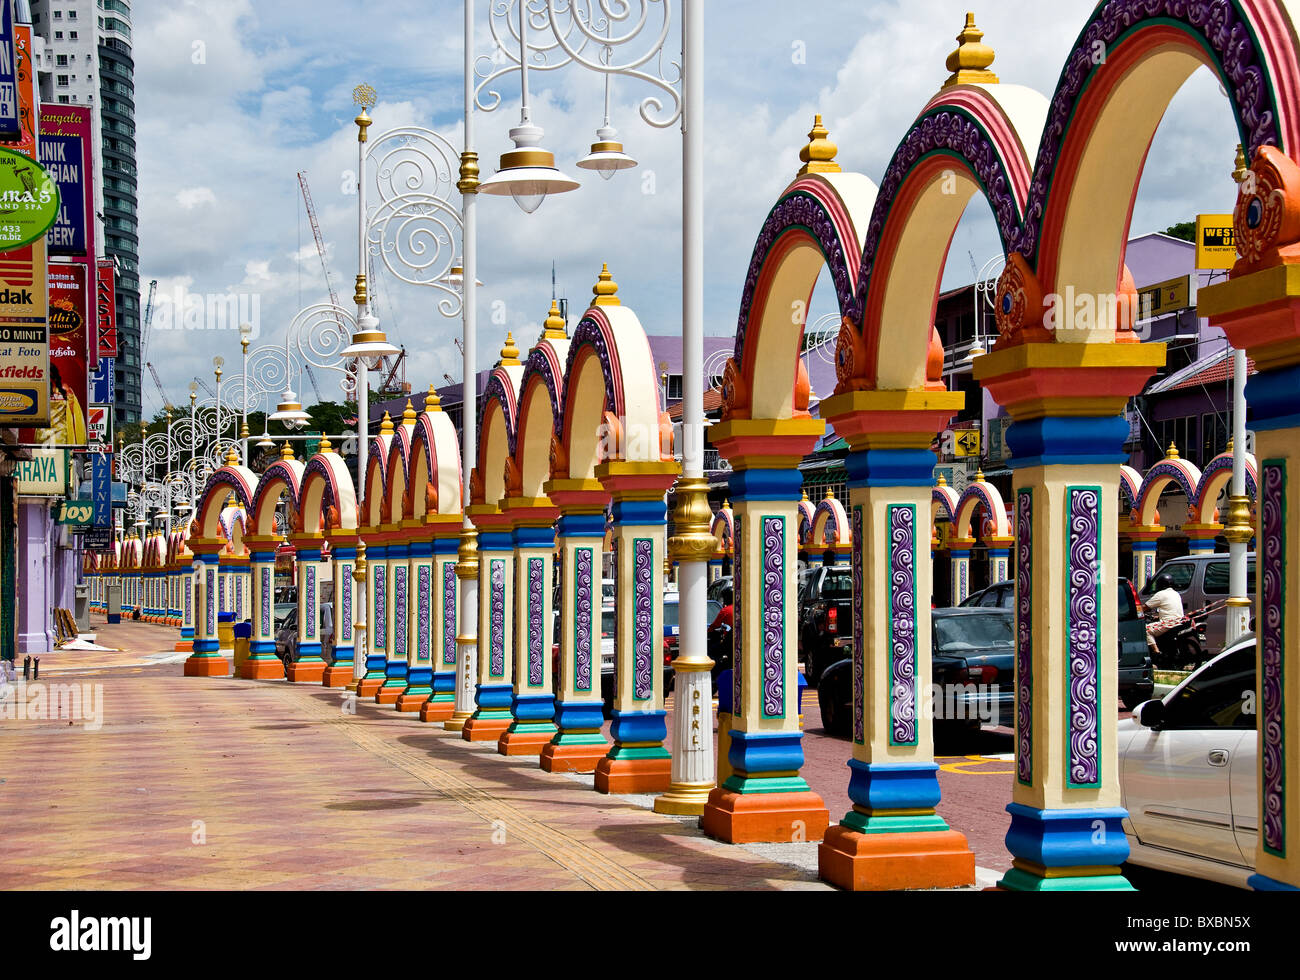 Ornate colourful arches on the pavement in Little India in Kuala Lumpur. Stock Photo